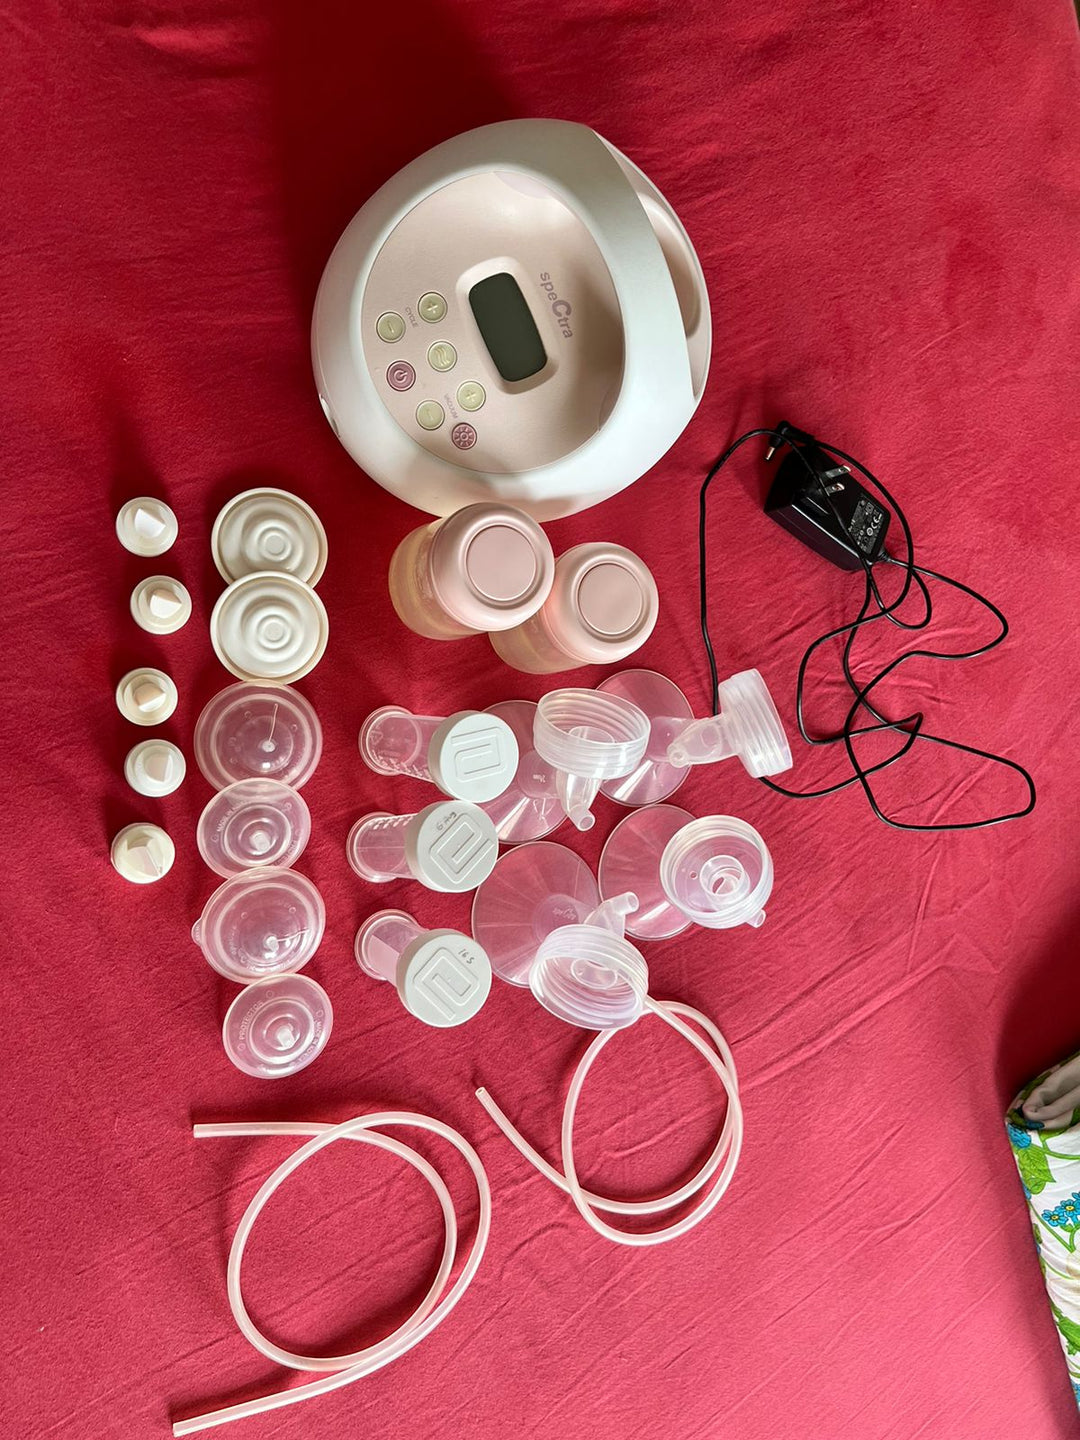 Spectra Electric Breast Pump S -2 Plus With extra flanges, valves and Storage bottles